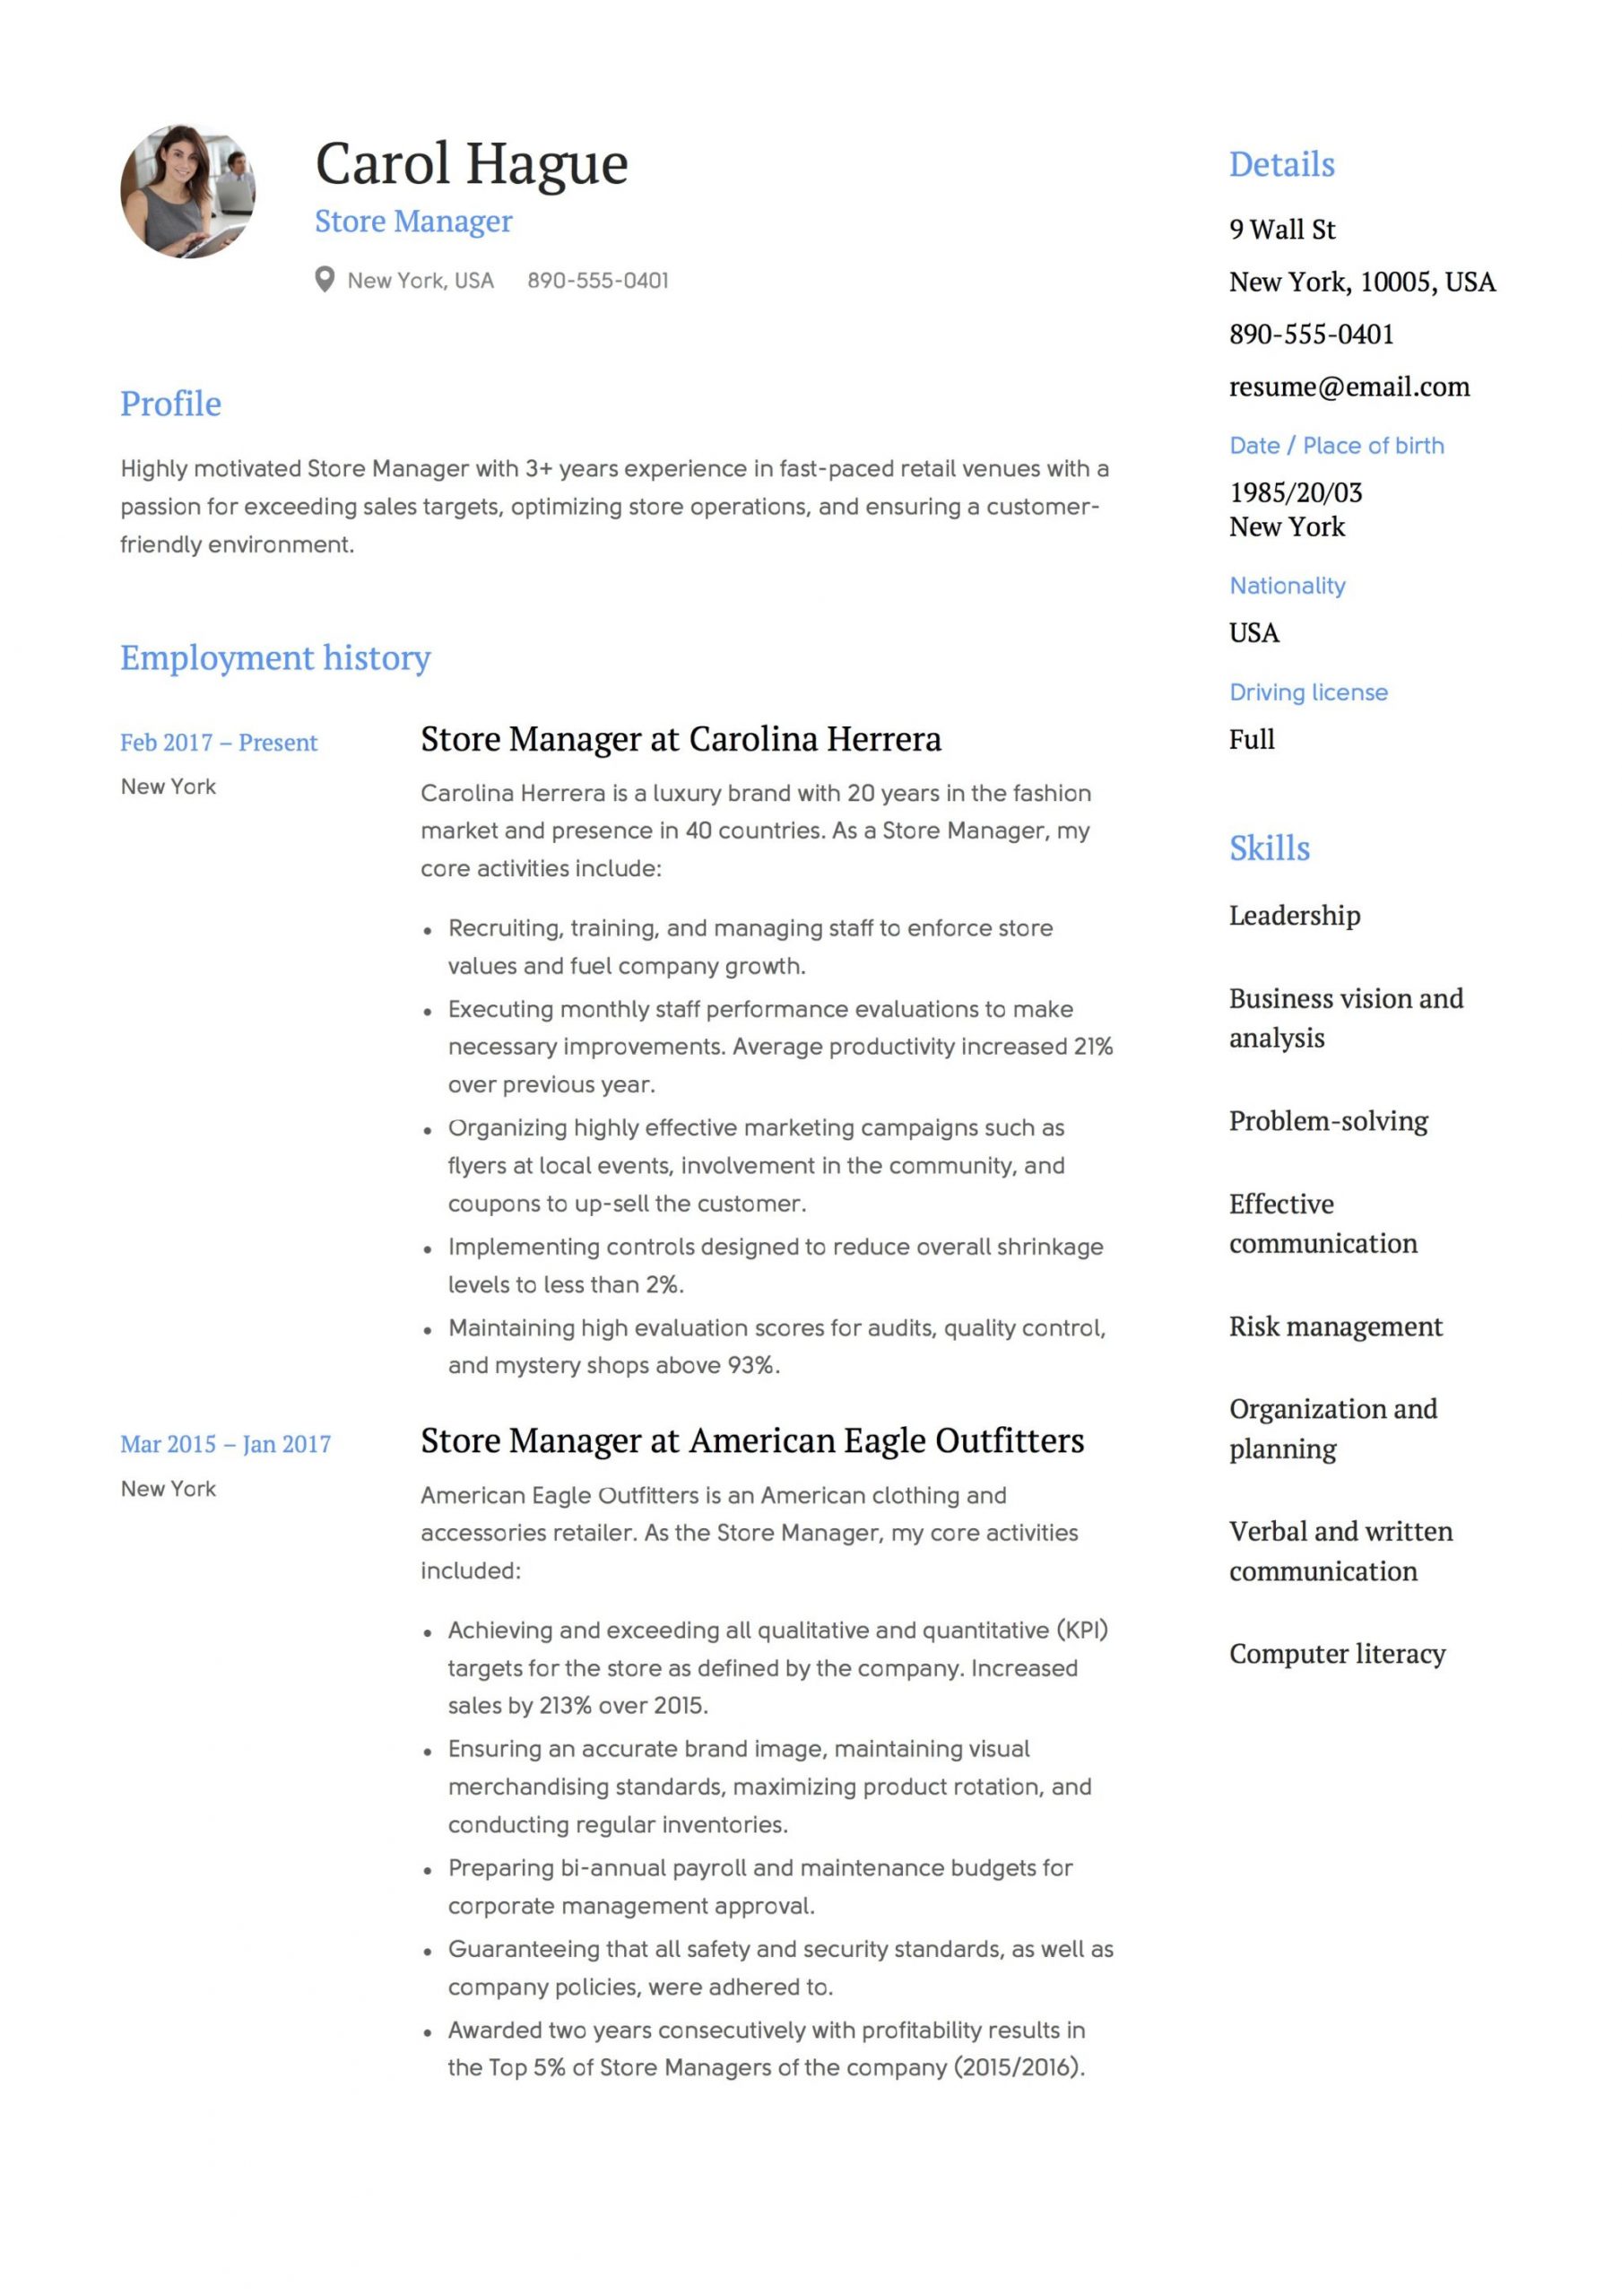 Free Sample Resume Retail Store Manager Store Manager Resume & Guide 12 Templates Pdf 2021